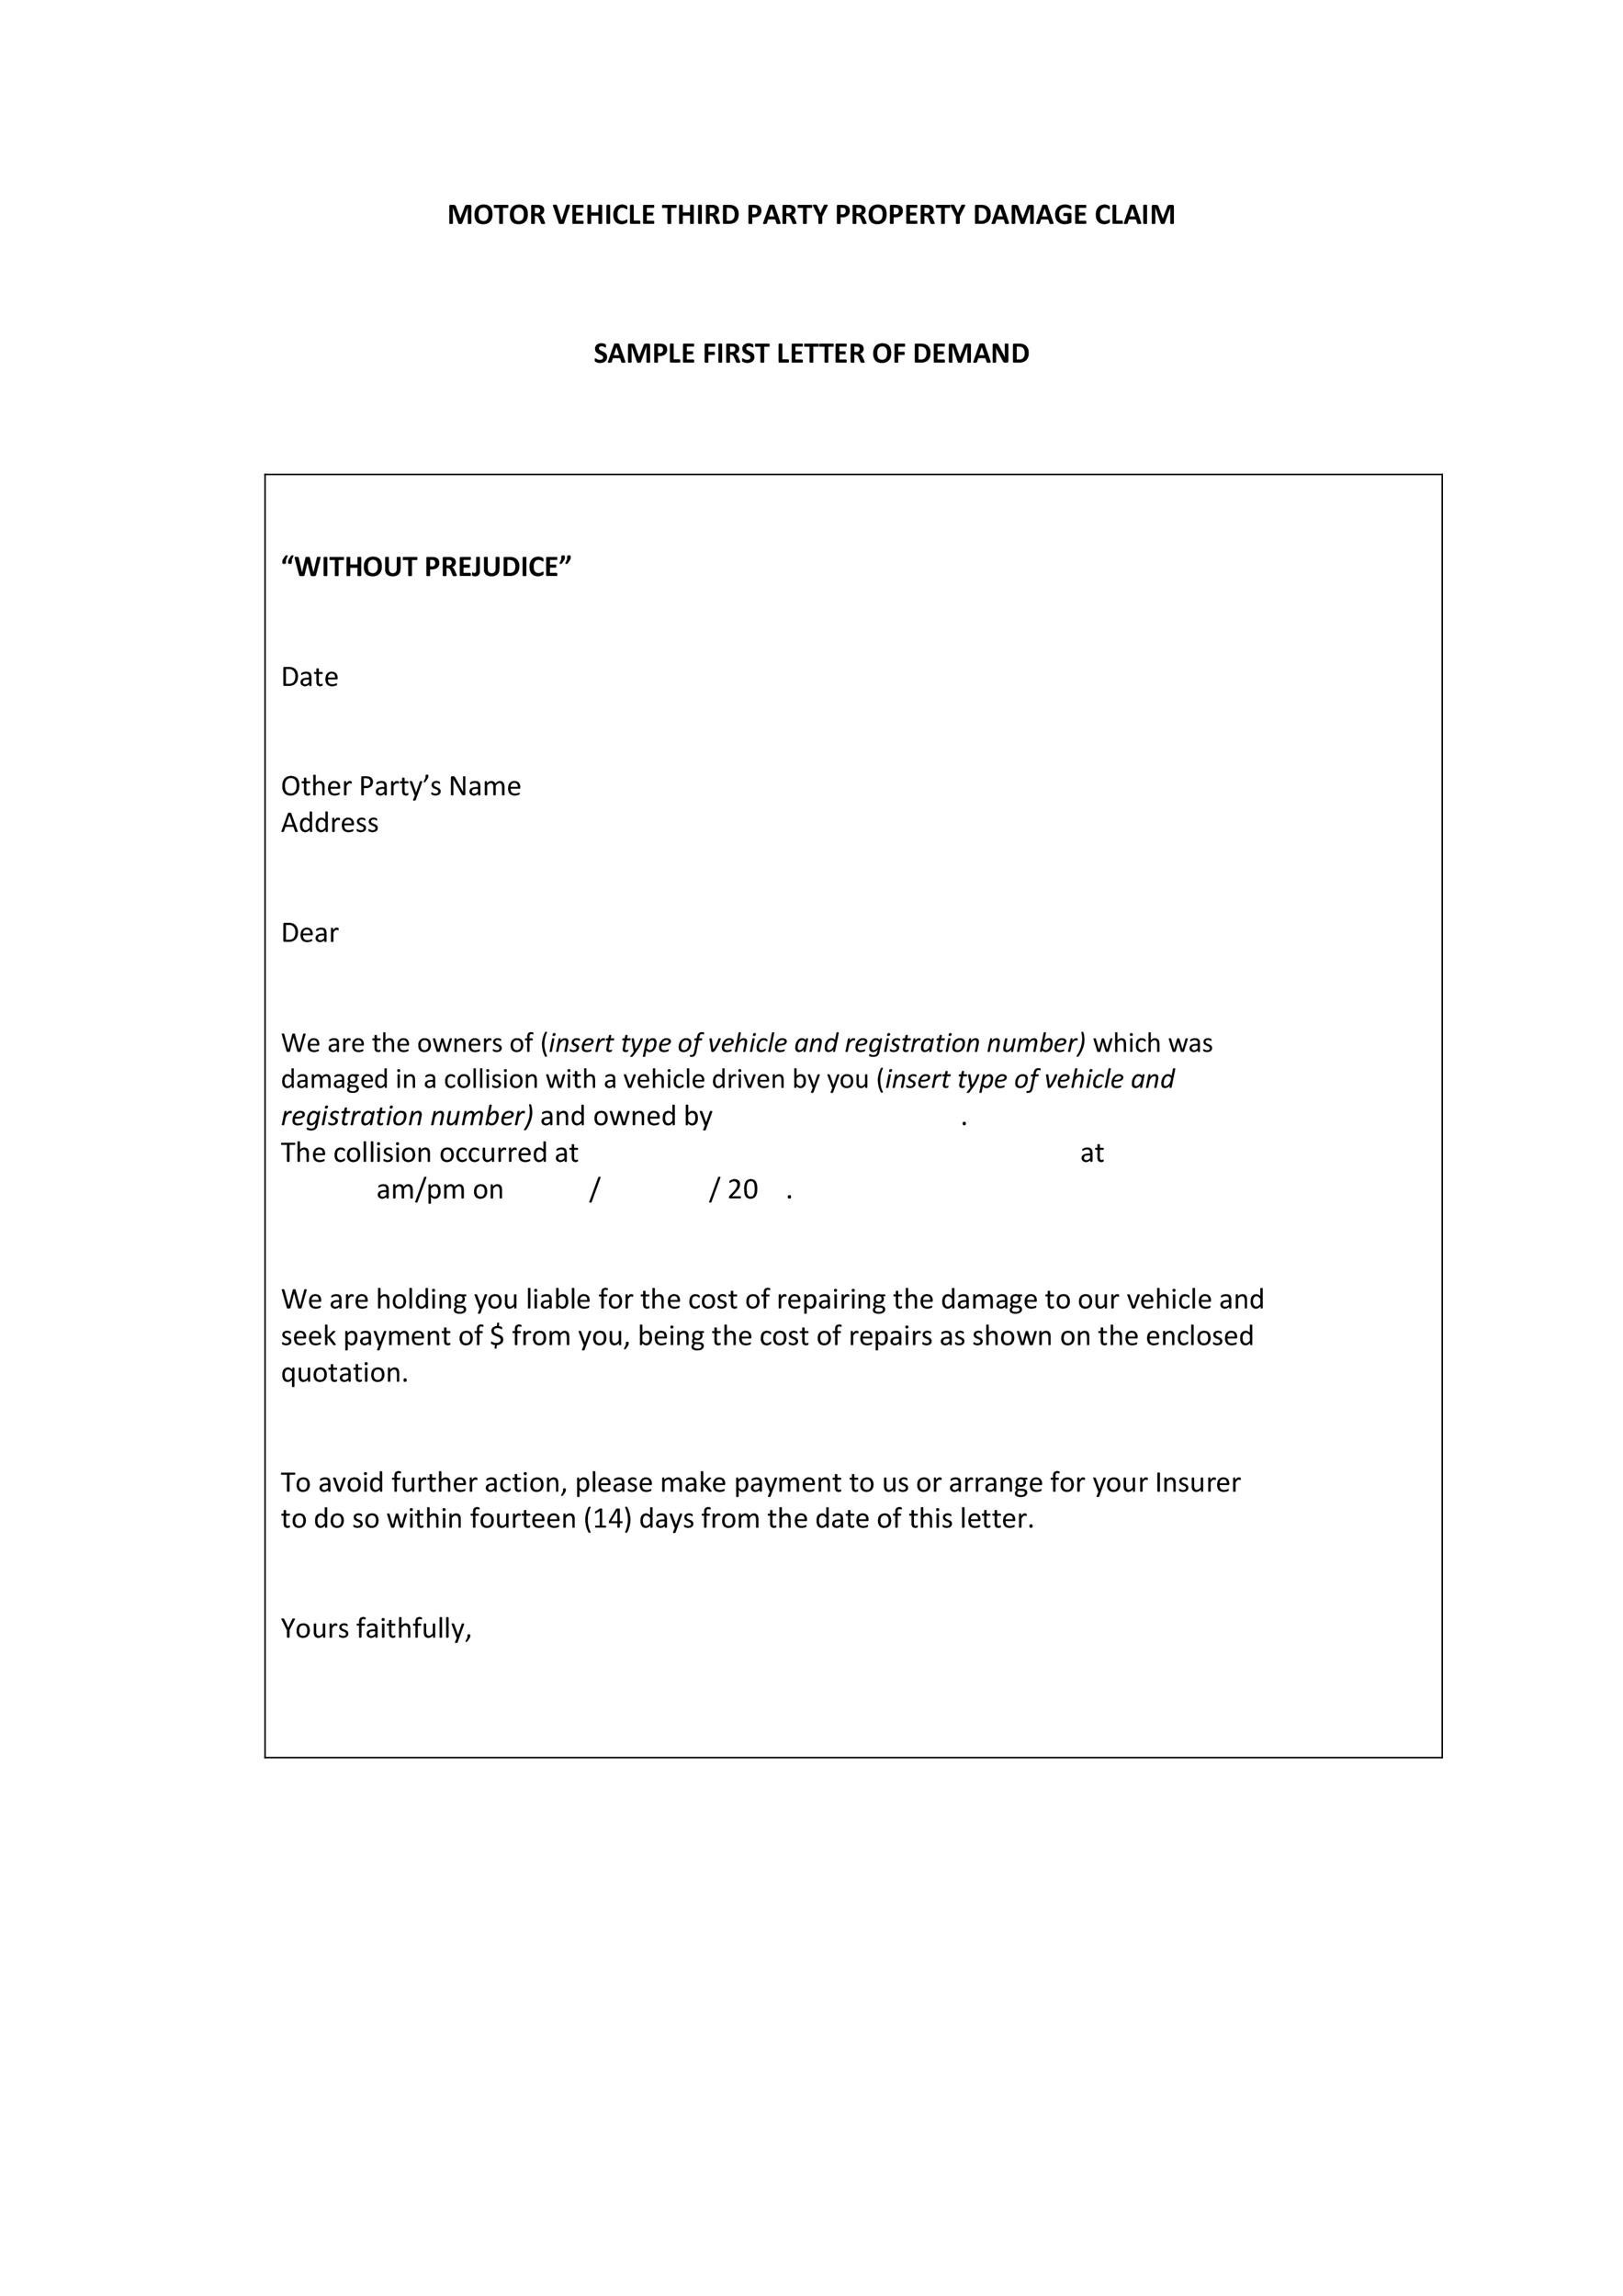 49 Free Claim Letter Examples How To Write A Claim Letter